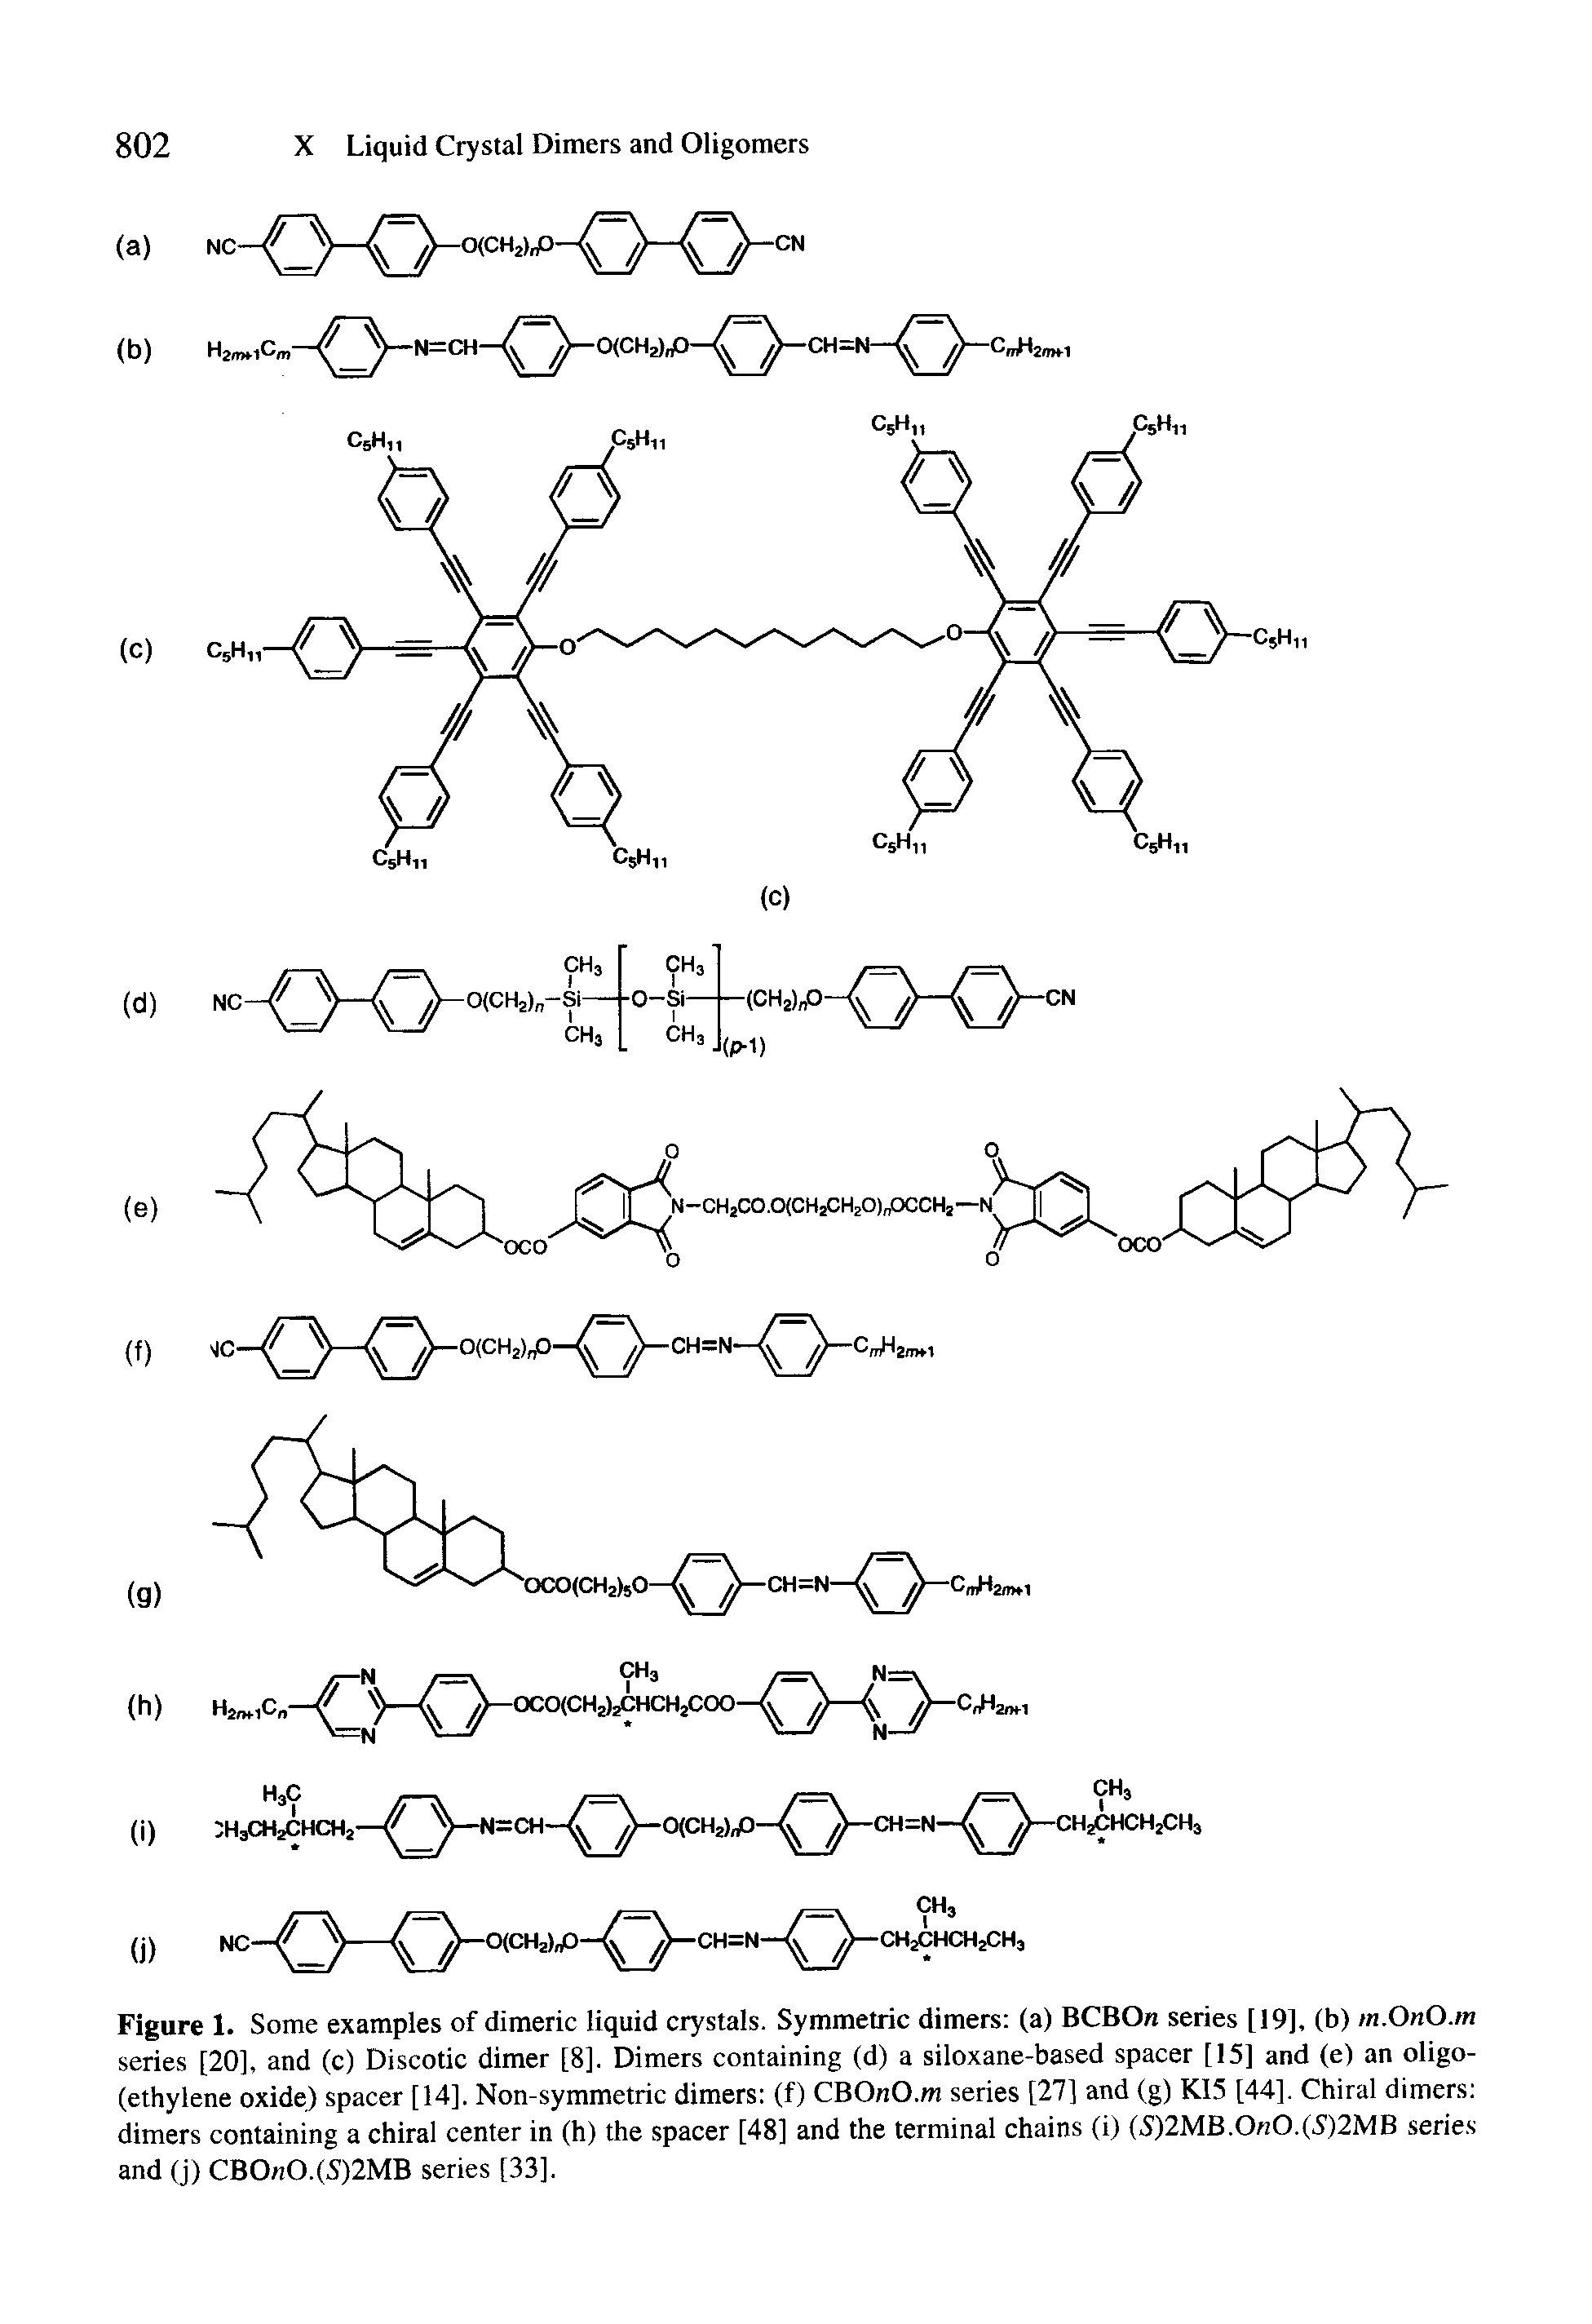 Figure 1. Some examples of dimeric liquid crystals. Symmetric dimers (a) BCBOn series [19], (b) m.OnO.m series [20], and (c) Discotic dimer [8]. Dimers containing (d) a siloxane-based spacer [15] and (e) an oligo-(ethylene oxide) spacer [14], Non-symmetric dimers (f) CBOnO.m series [27] and (g) K15 [44], Chiral dimers dimers containing a chiral center in (h) the spacer [48] and the terminal chains (i) (S)2MB.OnO.(5)2MB series and (j) CBOnO.(S)2MB series [33].